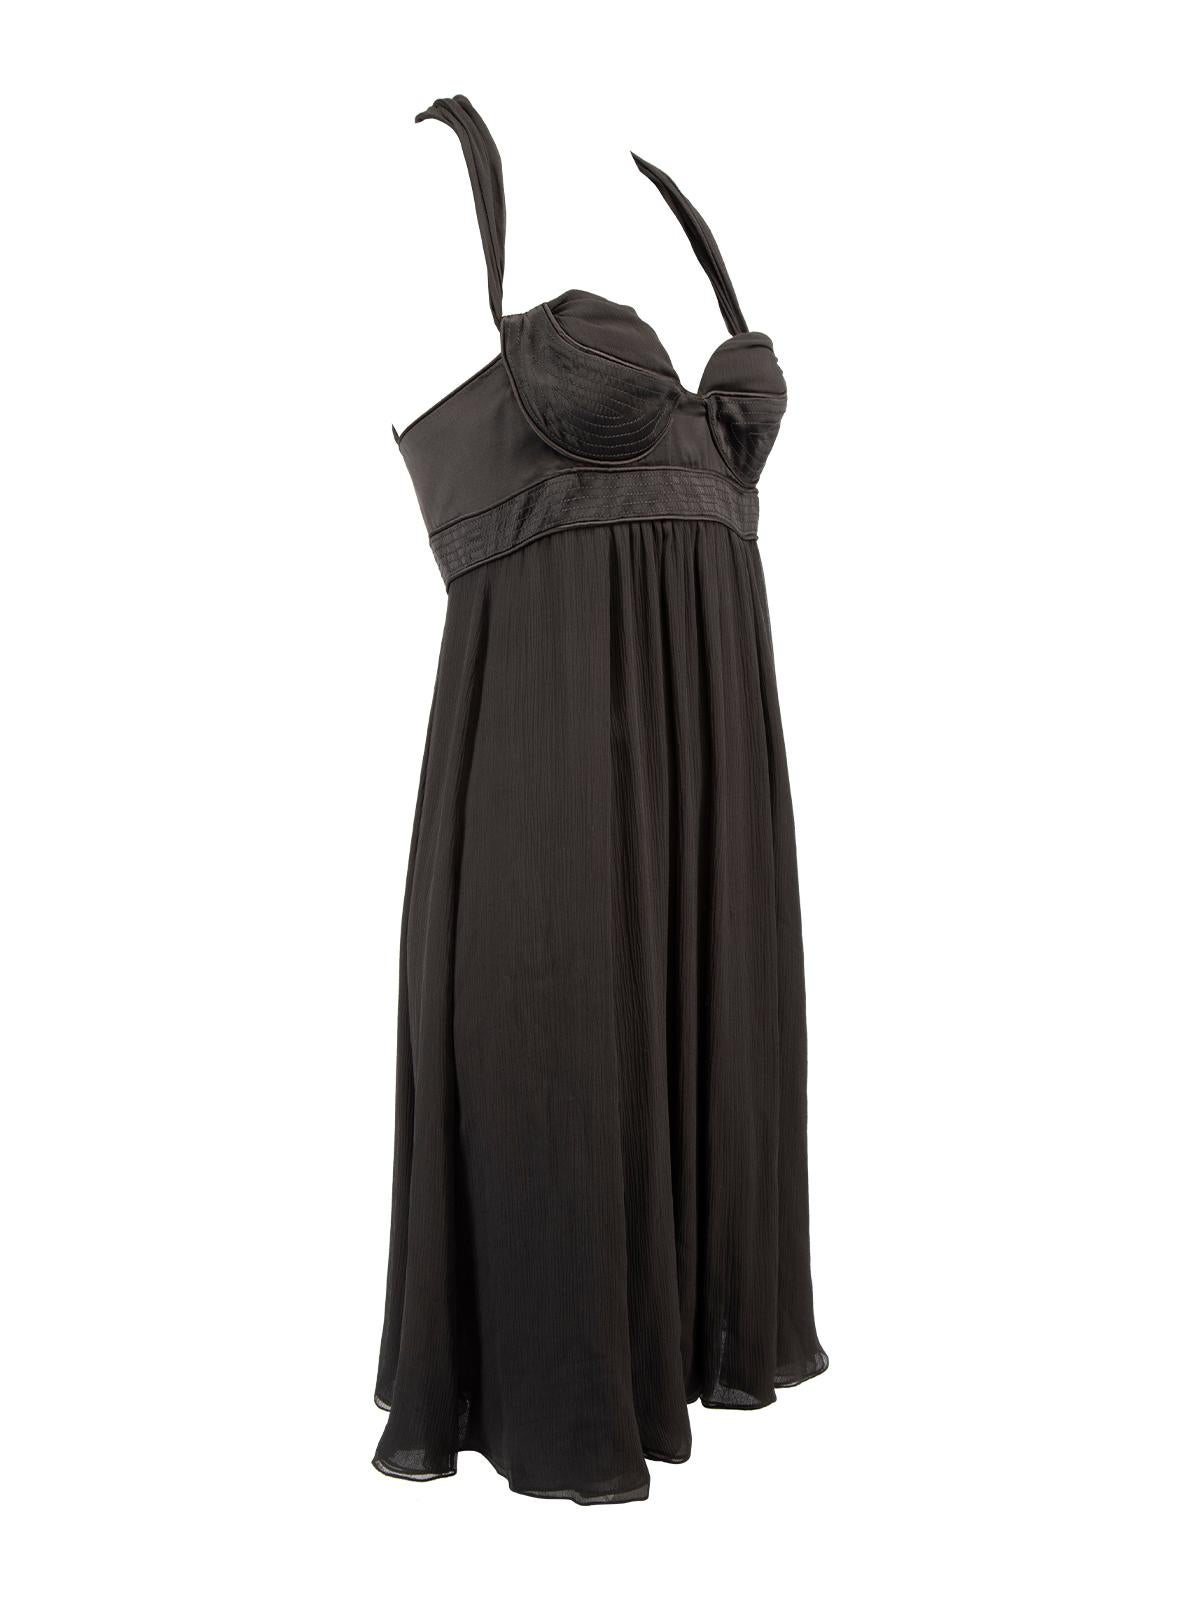 CONDITION is Very good. Hardly any visible wear to dress is evident. Some loose threads can be seen, especially on the fastening clasps on this used Proenza Schouler designer resale item. . Details Black Silk Flowy midi dress Corset bra with boning